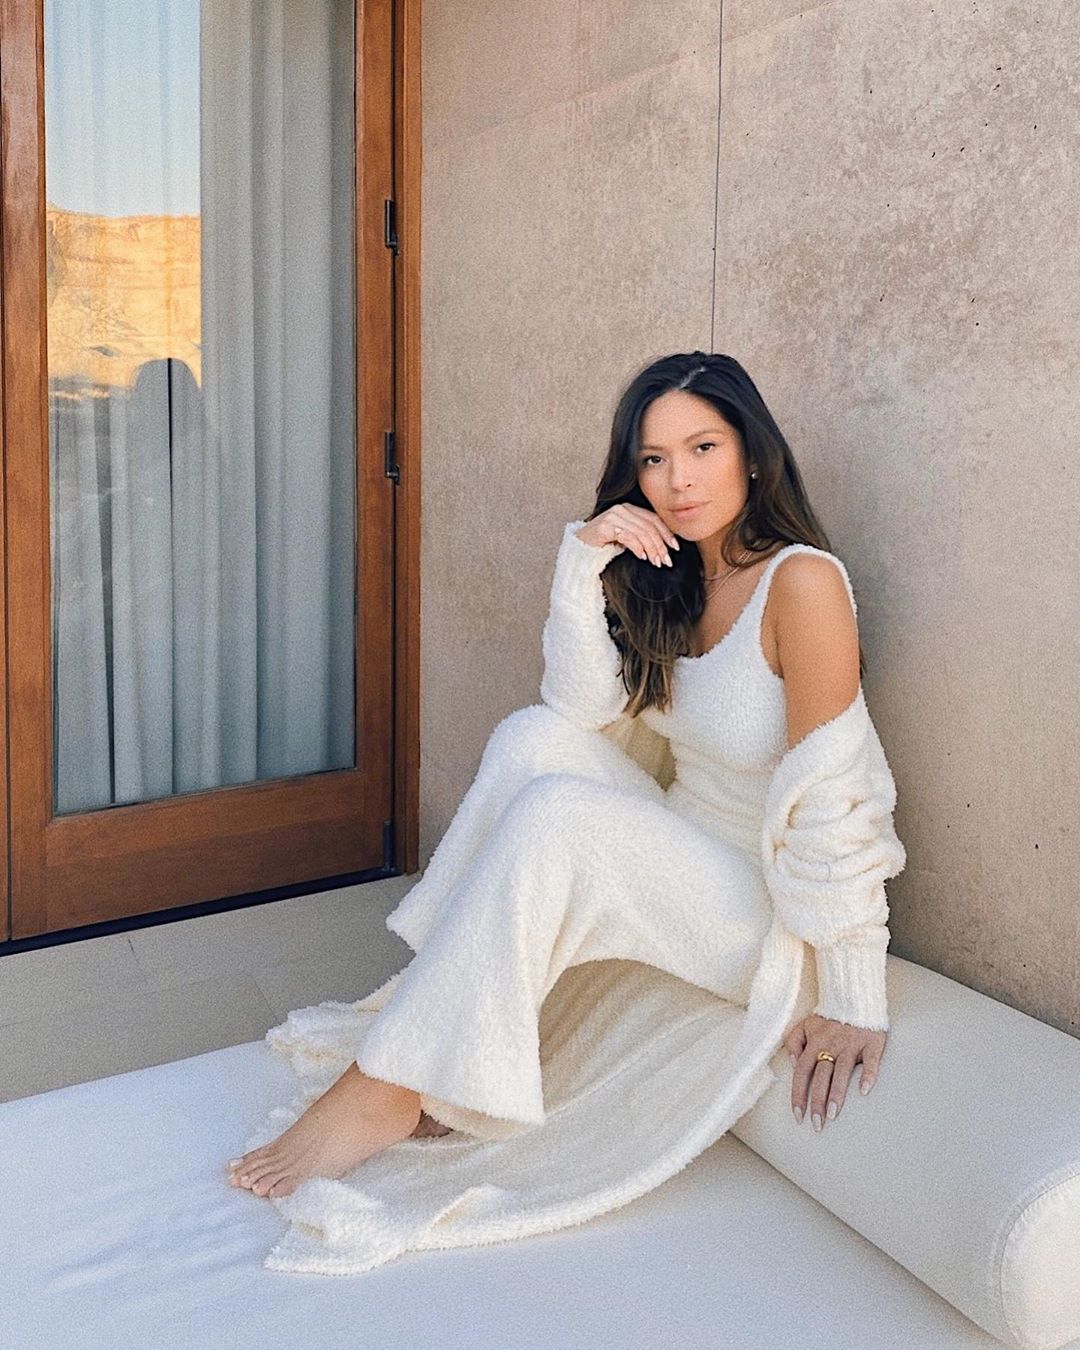 SKIMS on X: .@marianna_hewitt wears the Cozy Knit Pant and Cozy Knit Robe  in Bone - restocking on Thursday, March 5 at 9AM PST / 12PM EST. Join the  waitlist to receive